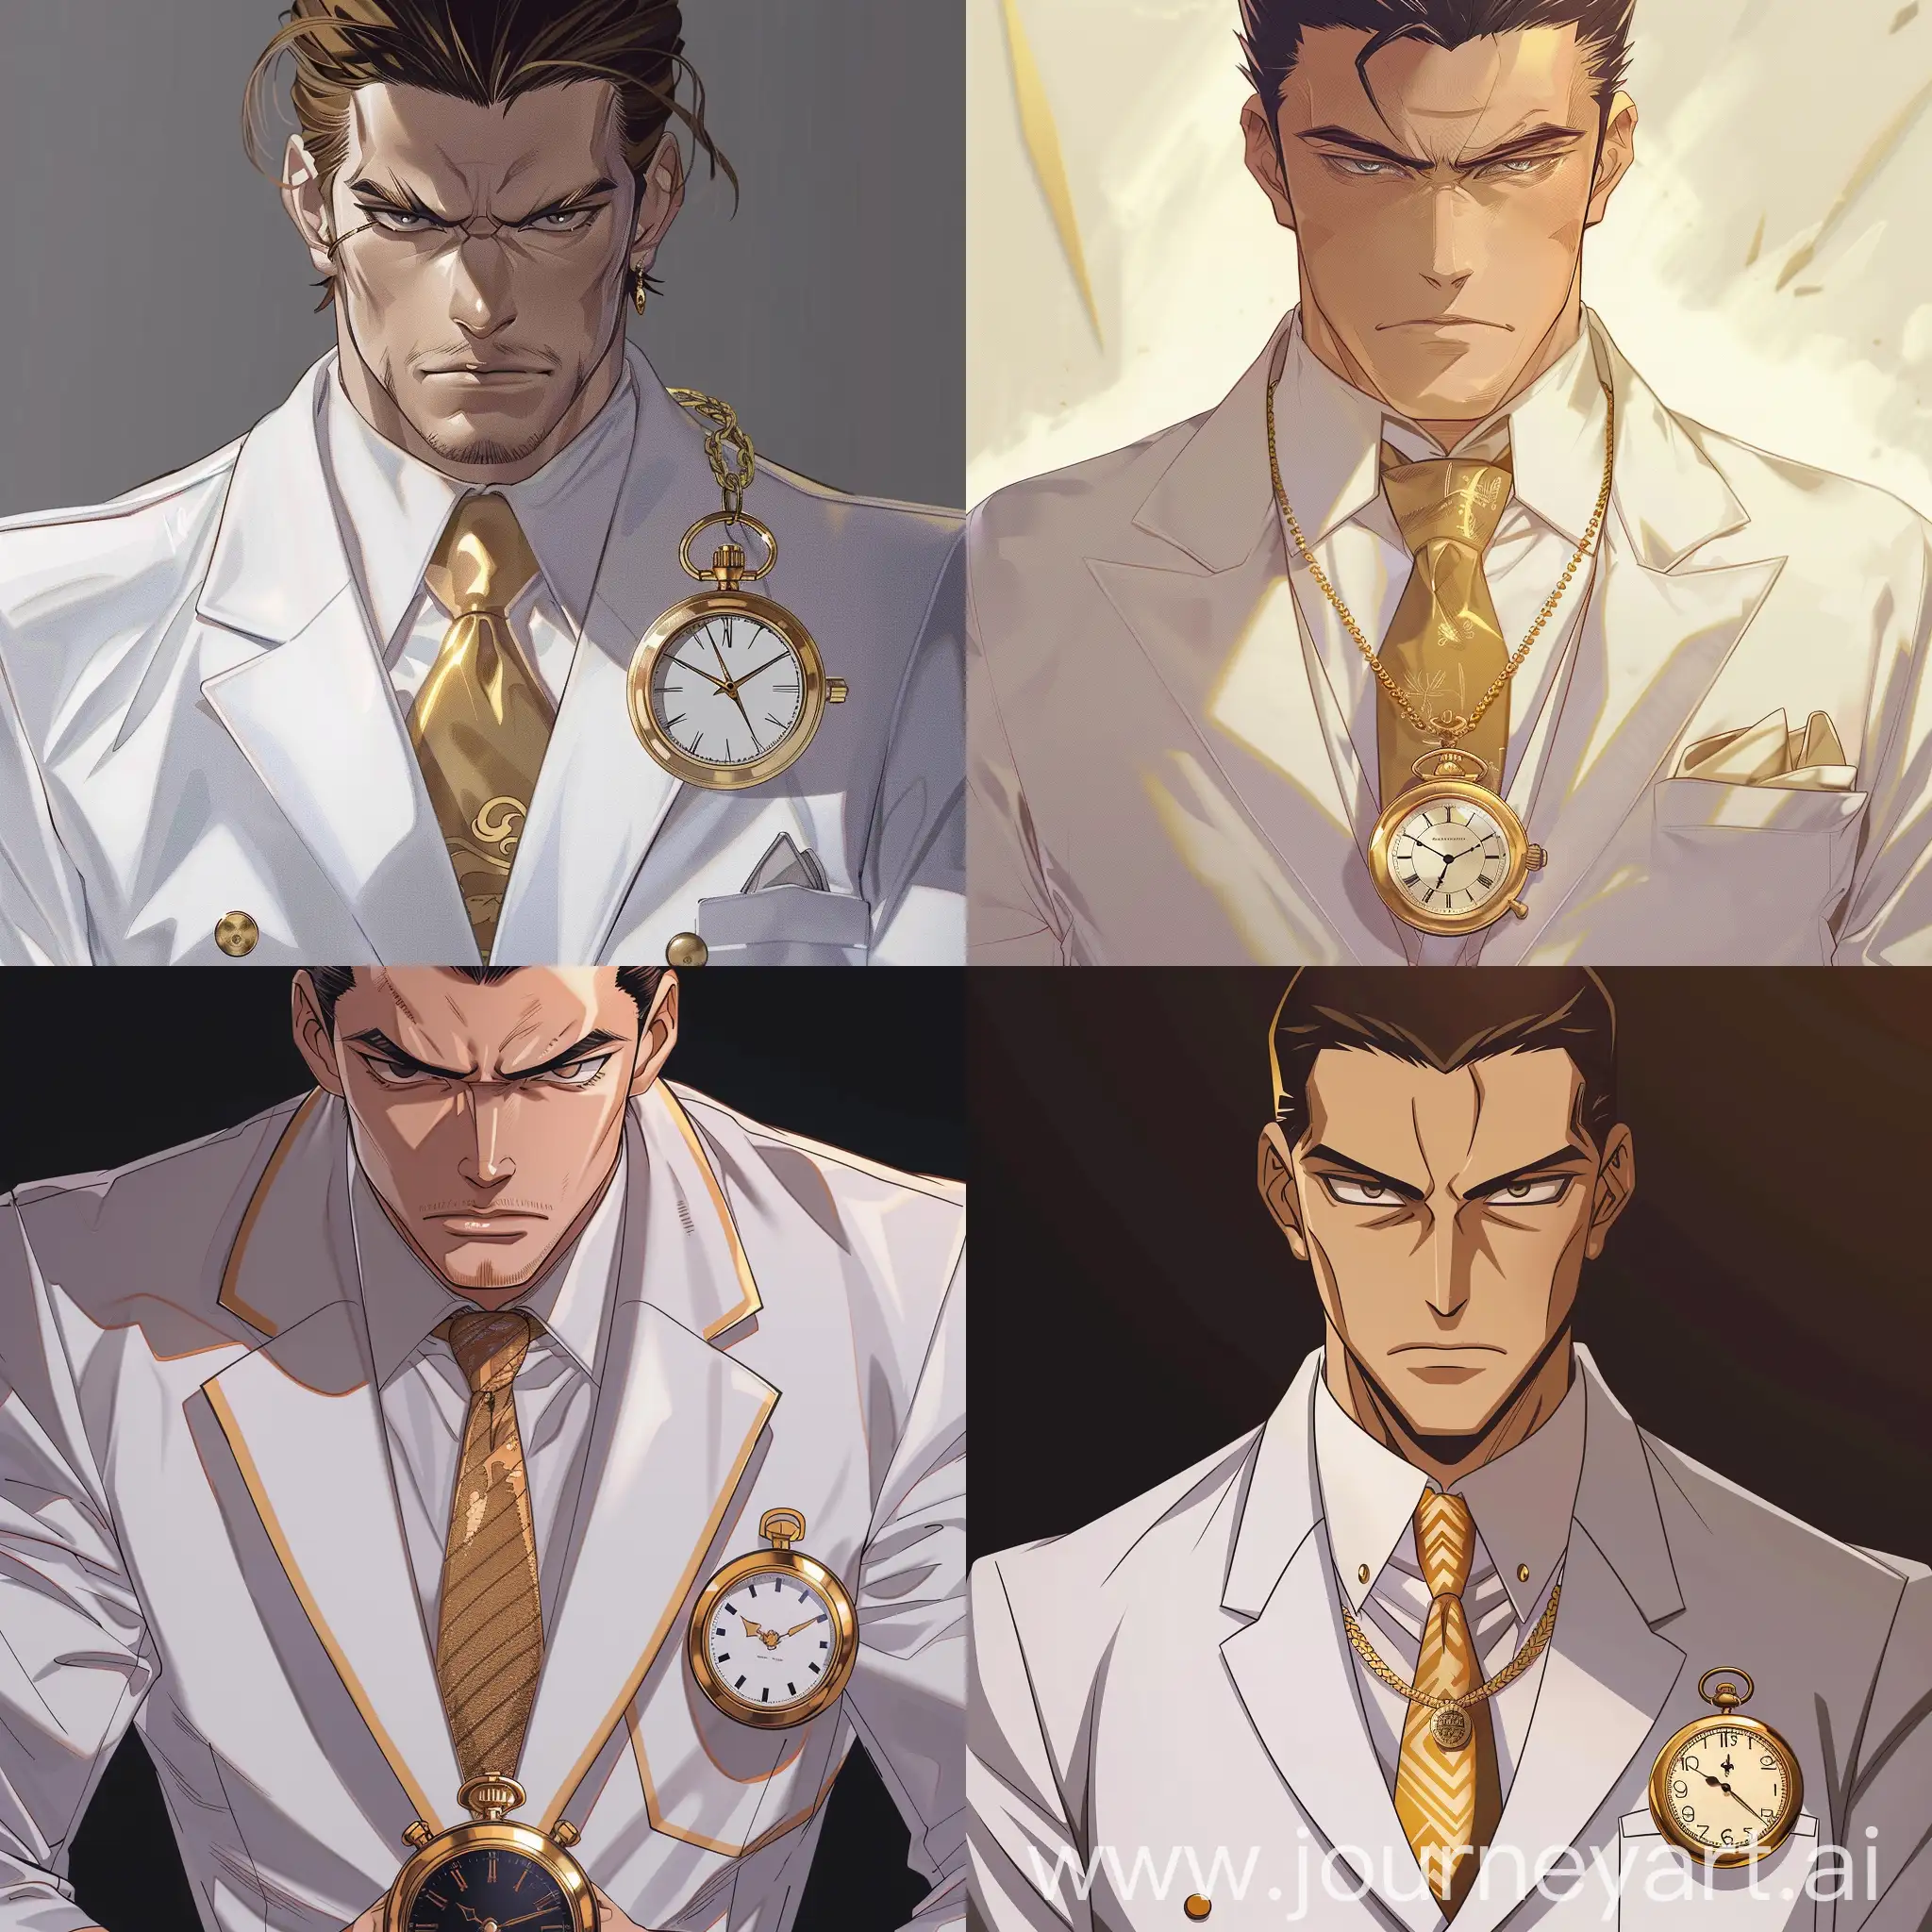 Anime-Style-Serious-Gentleman-with-Cold-Expression-in-White-Suit-and-Golden-Accessories